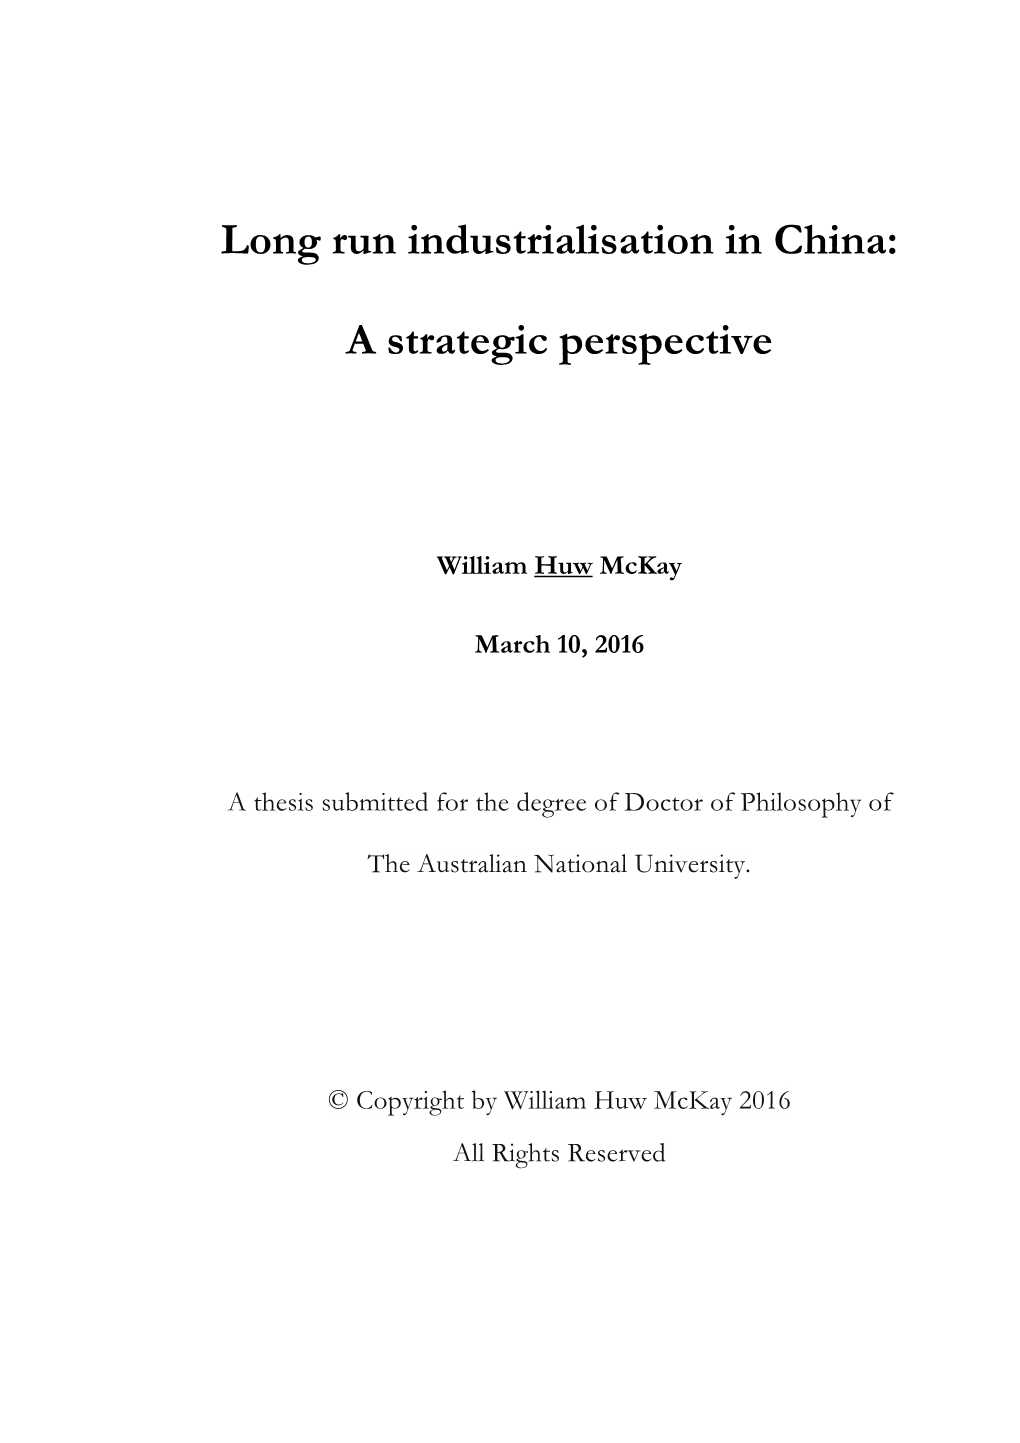 Long Run Industrialisation in China